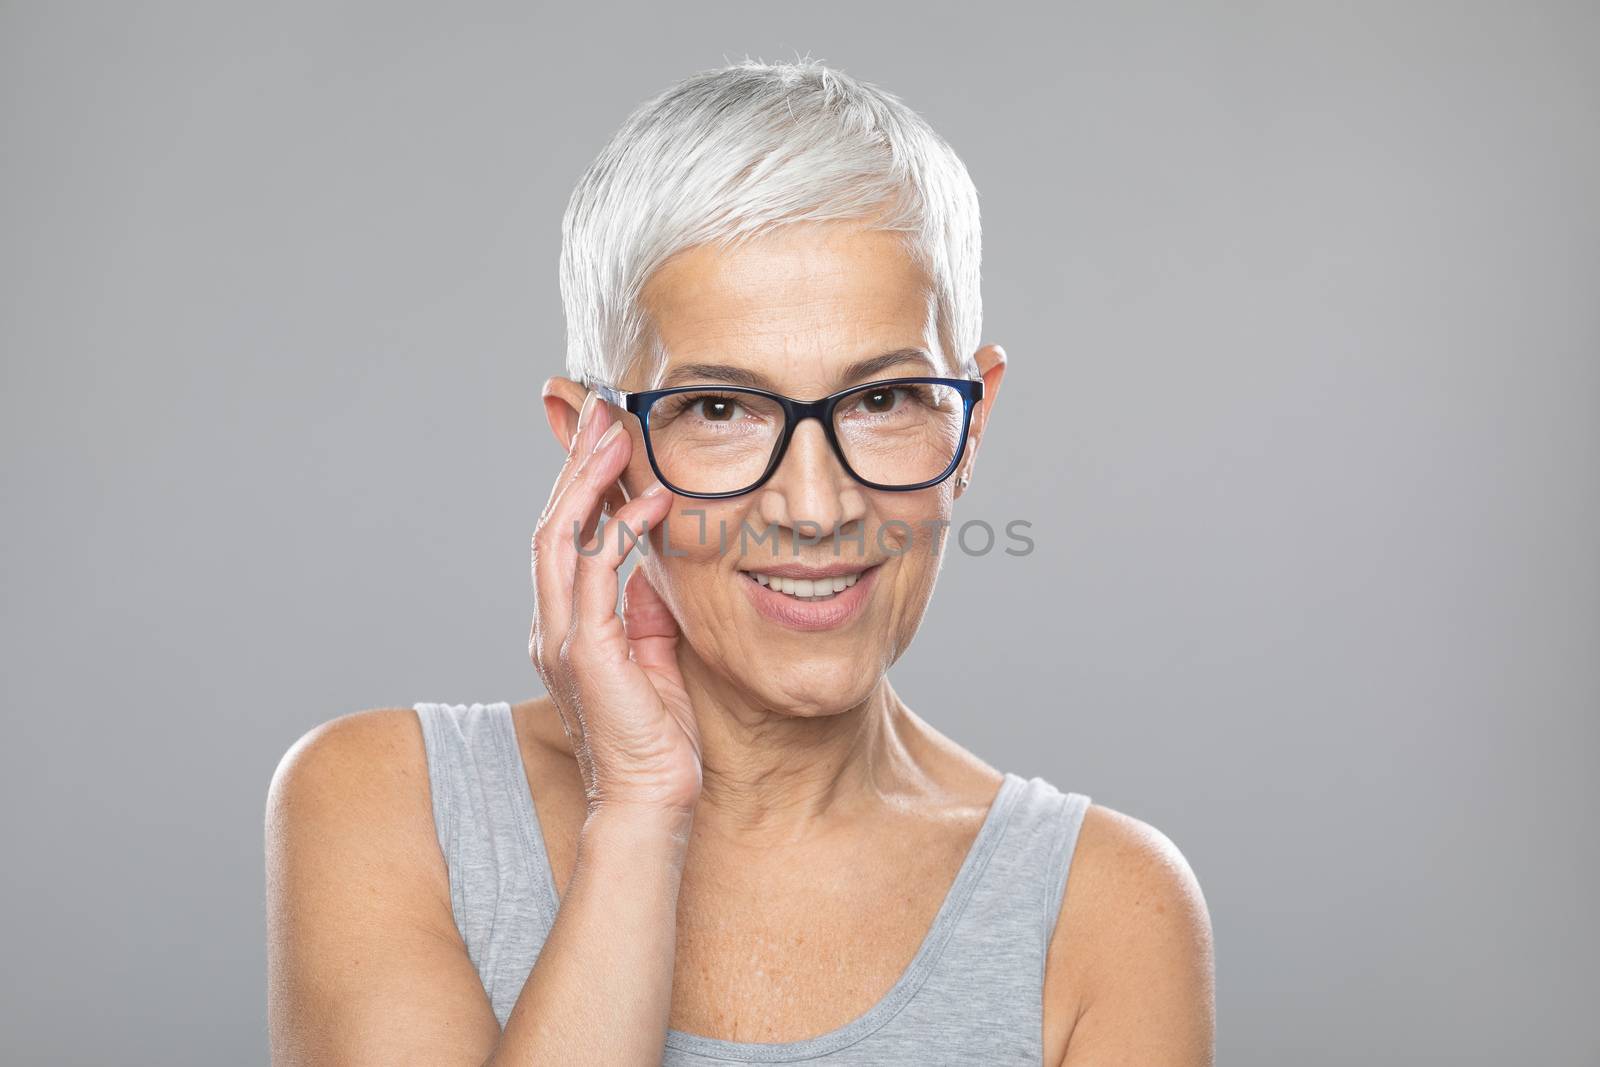 Beautiful smiling cute senior woman with short white hair and glasses posing in front of gray background